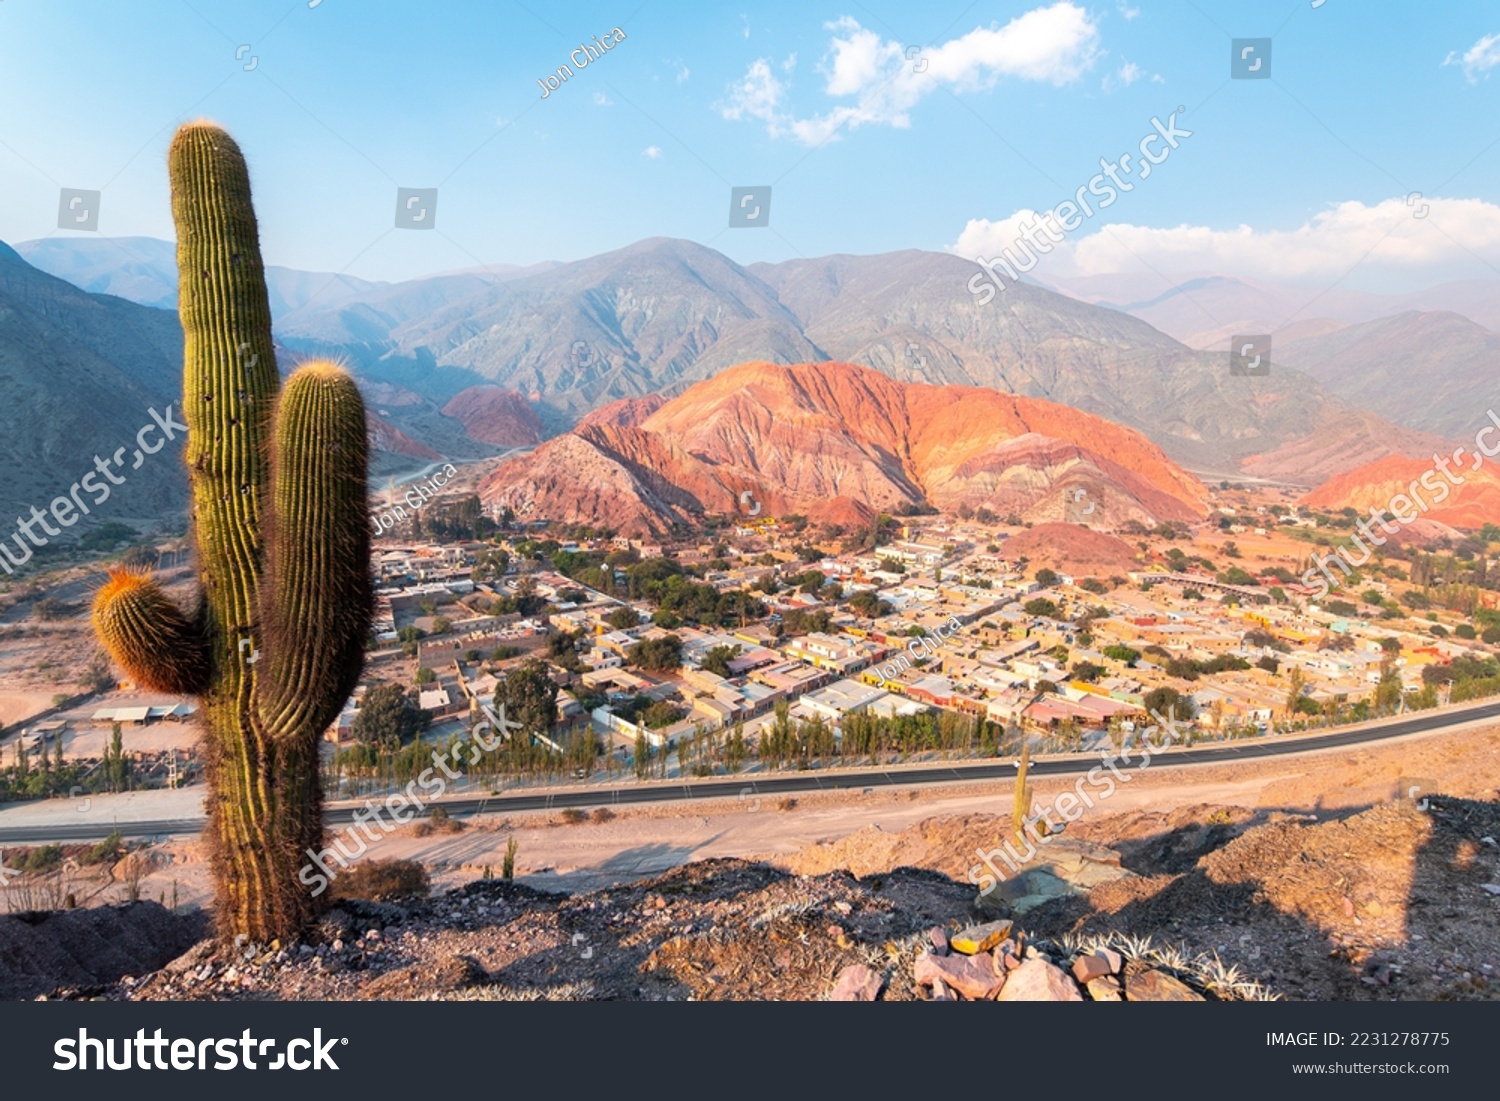 panoramic view of purmamarca native town in northern argentina #2231278775